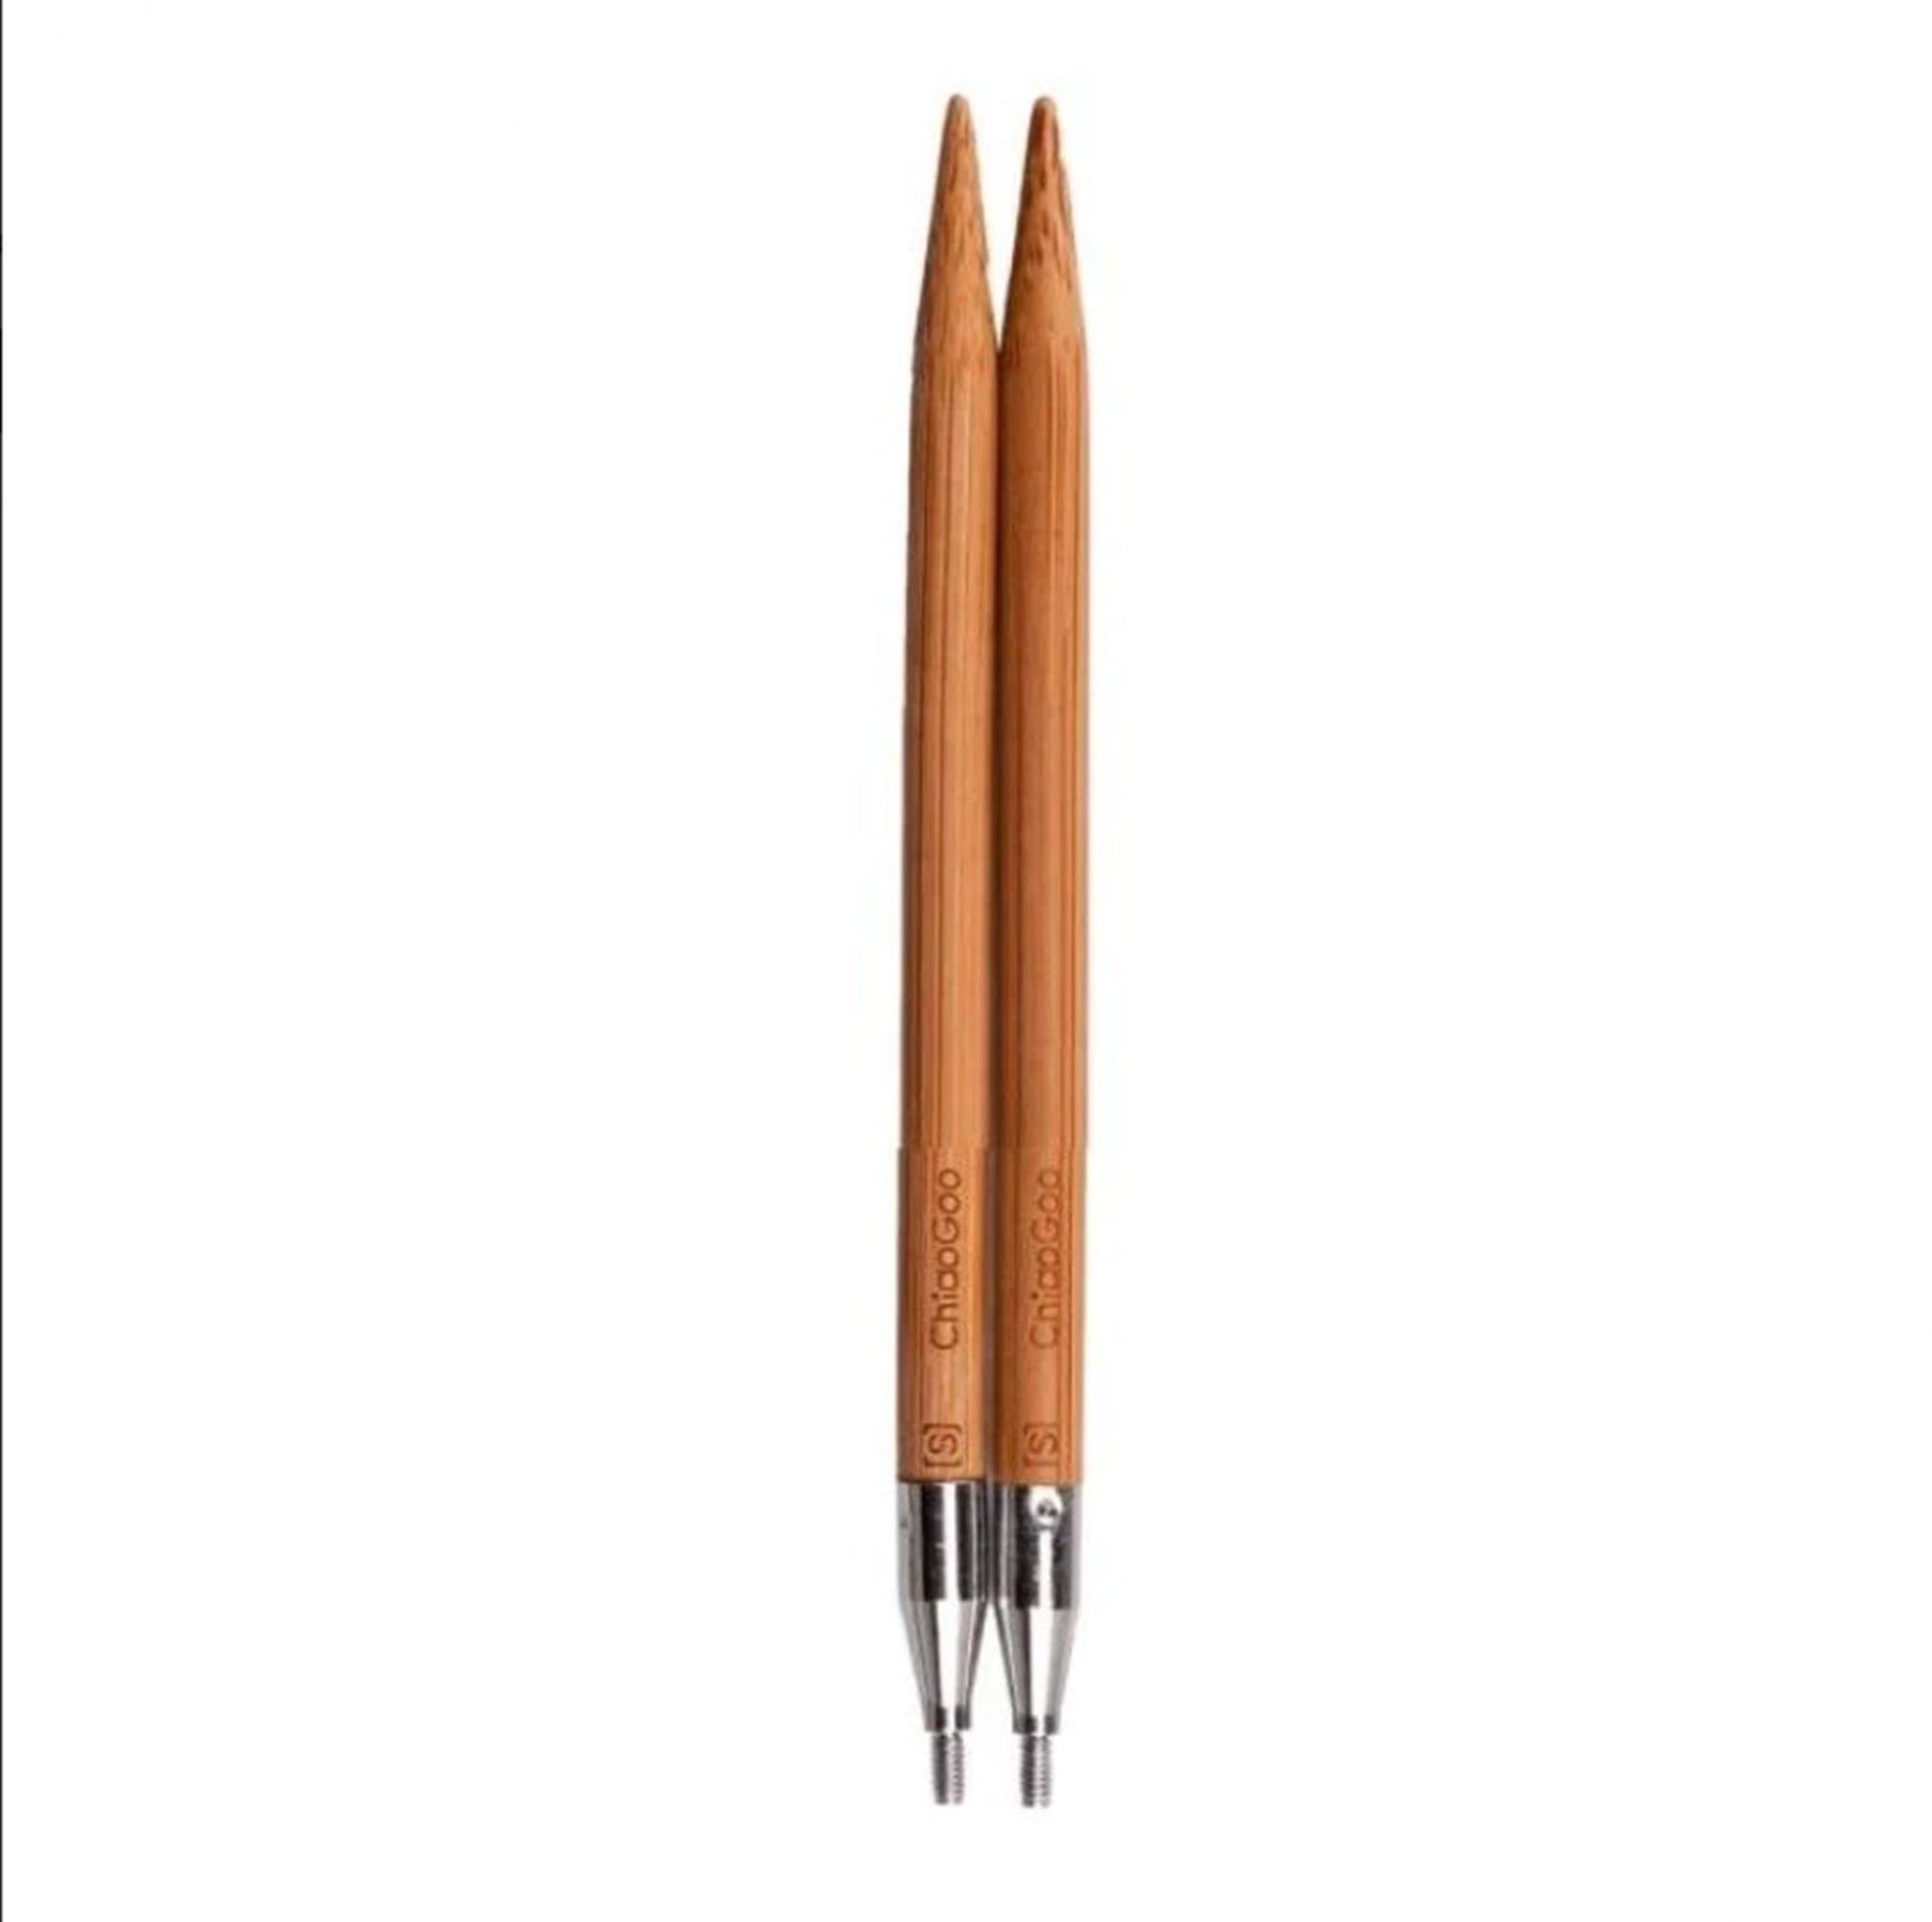 ChiaoGoo 4 inch (10 cm) Spin Knitting Needle Tip Bamboo - Size US-3 (3.25 mm)